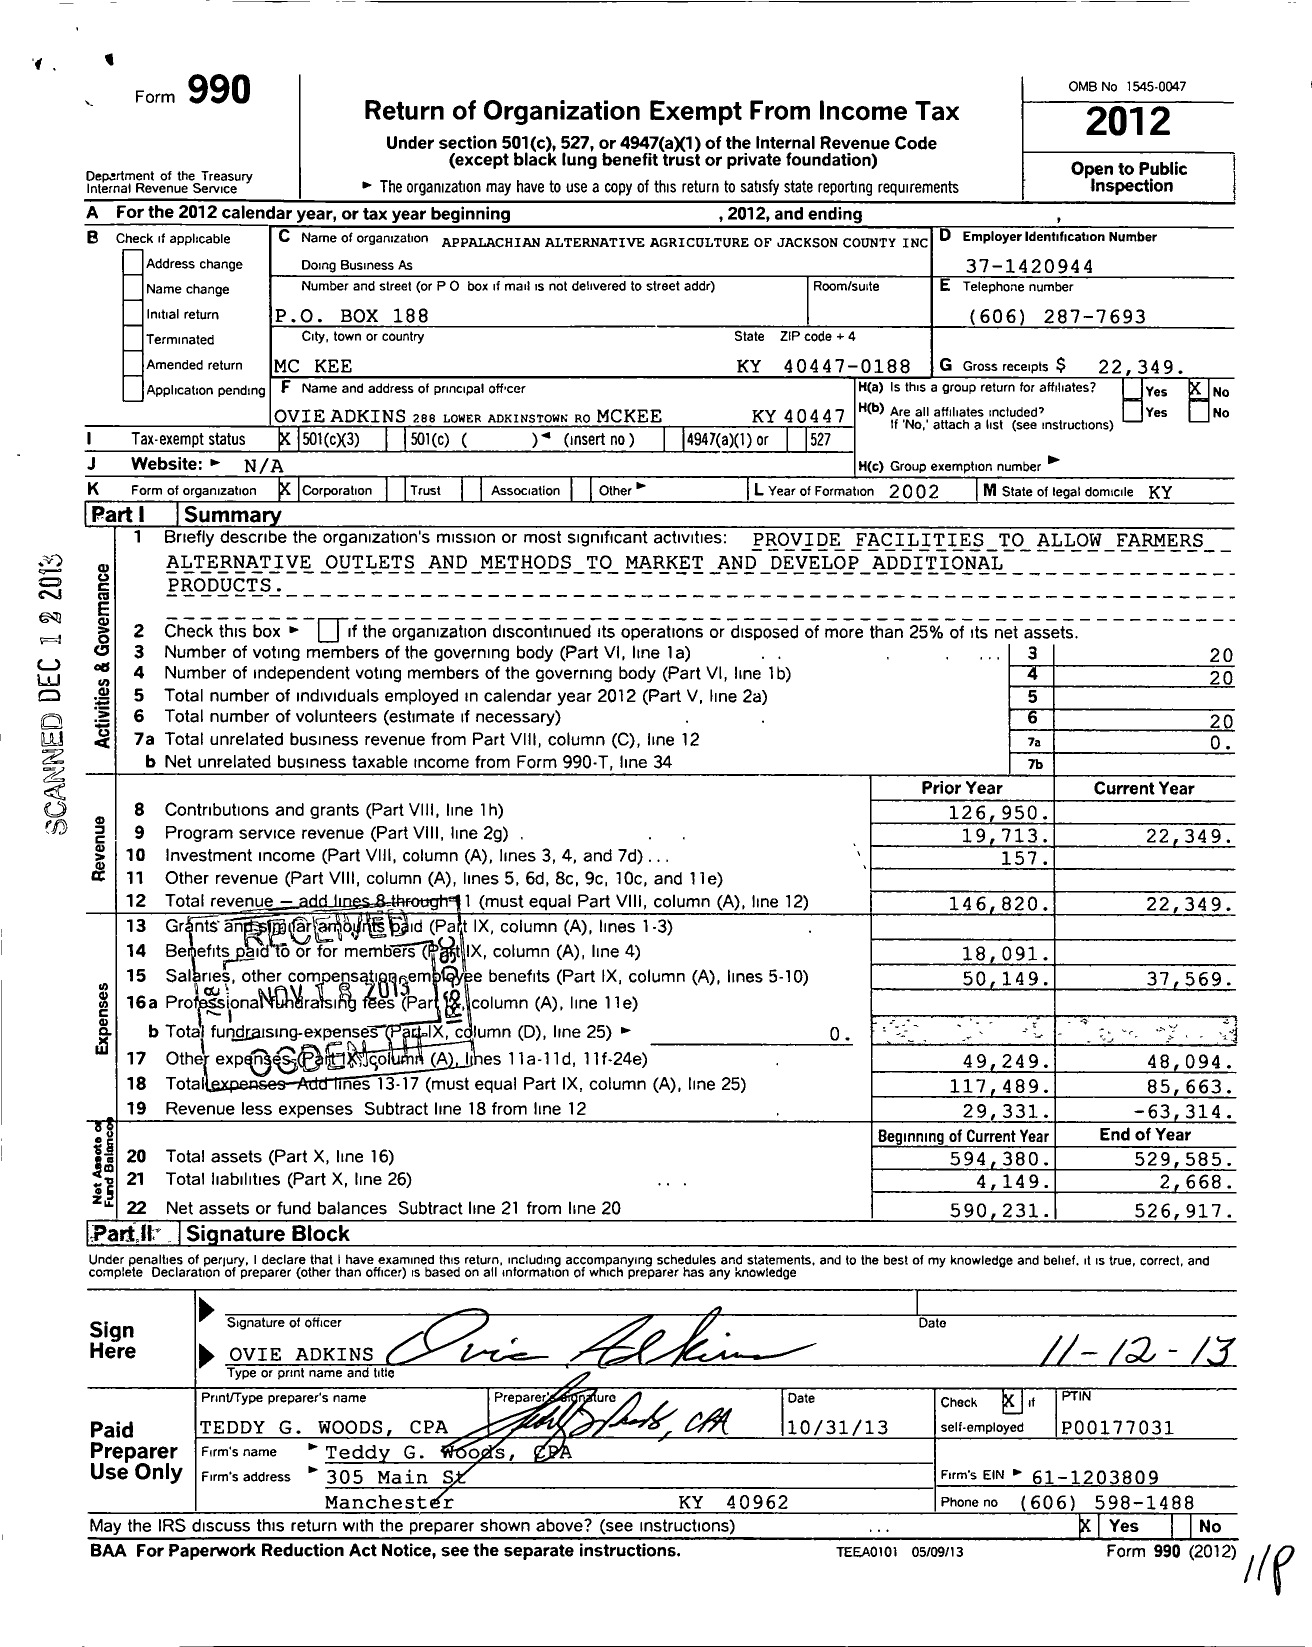 Image of first page of 2012 Form 990 for Appalachian Alternative Agriculture of Jackson County